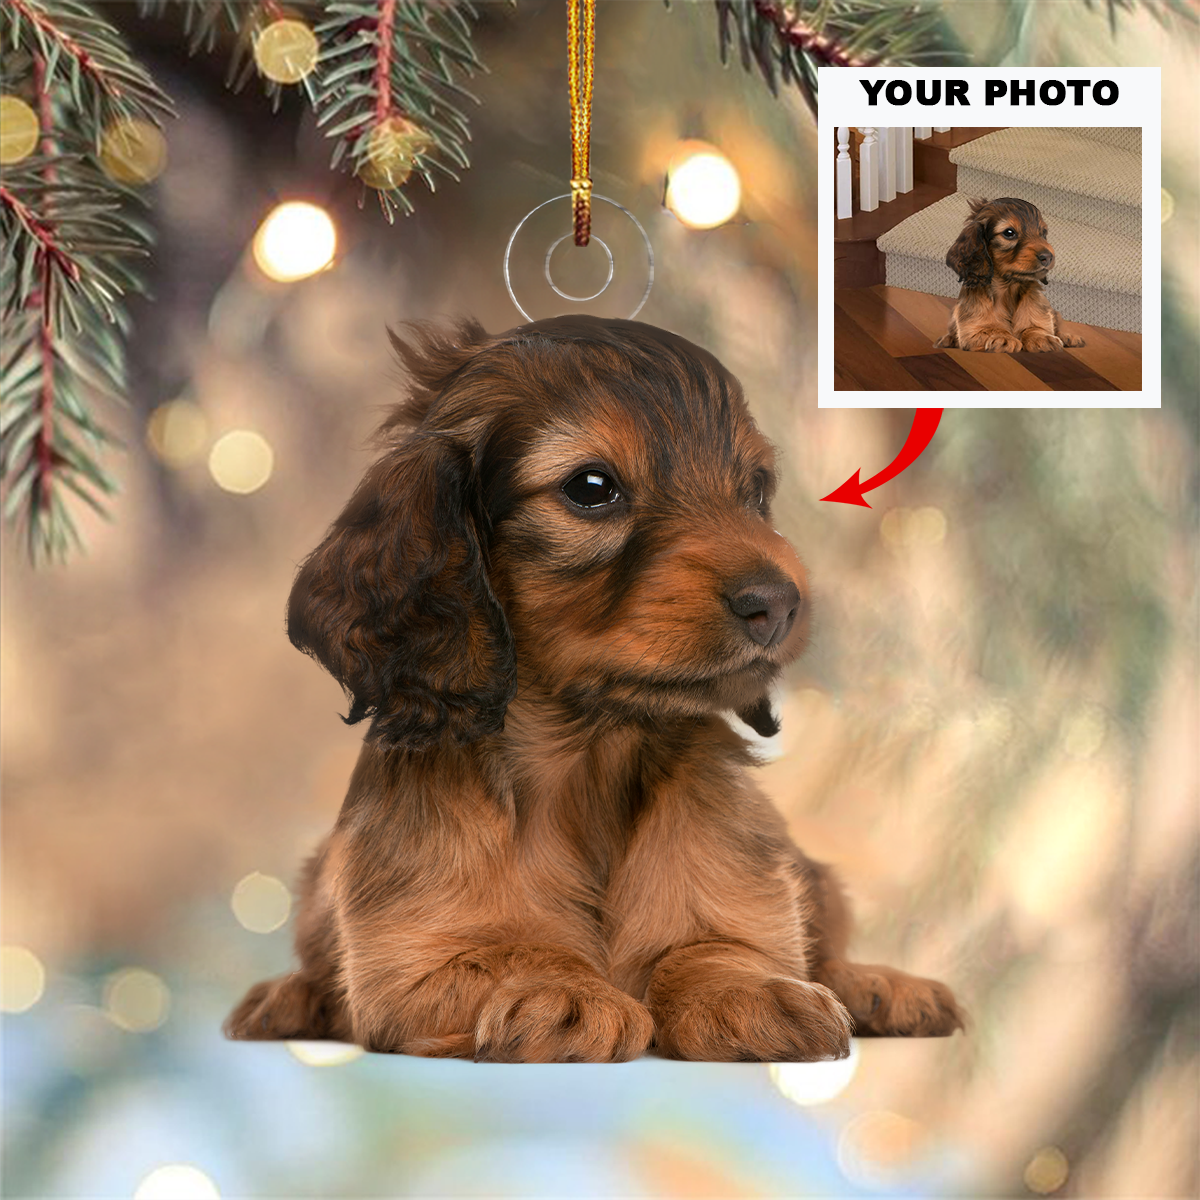 Personalized Photo Mica Ornament - Christmas, Birthday Gift For Pet Mom, Pet Dad, Dog Mom, Dog Dad, Cat Mom, Cat Dad, Dog Parents  -  Customized Your Photo Ornament